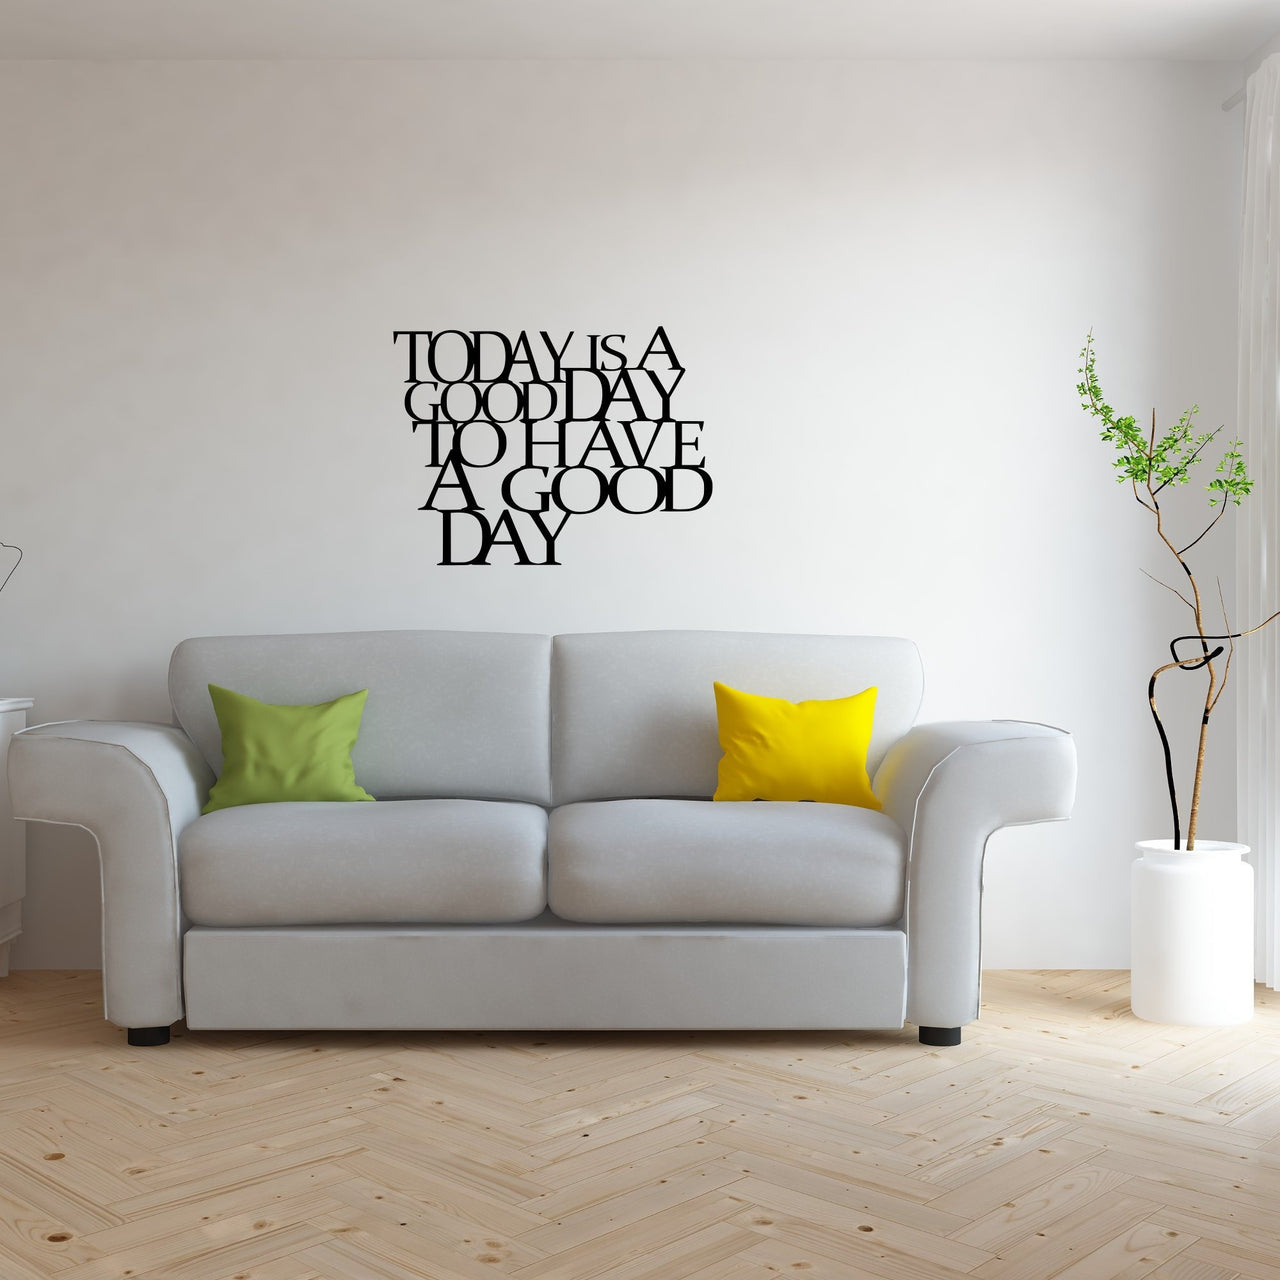 Today is a Good Day to Have a Good Day Sign | Inspirational Wall Art | Metal Wall Decor | Metal Wall Quote for Office or Home | Wall Saying